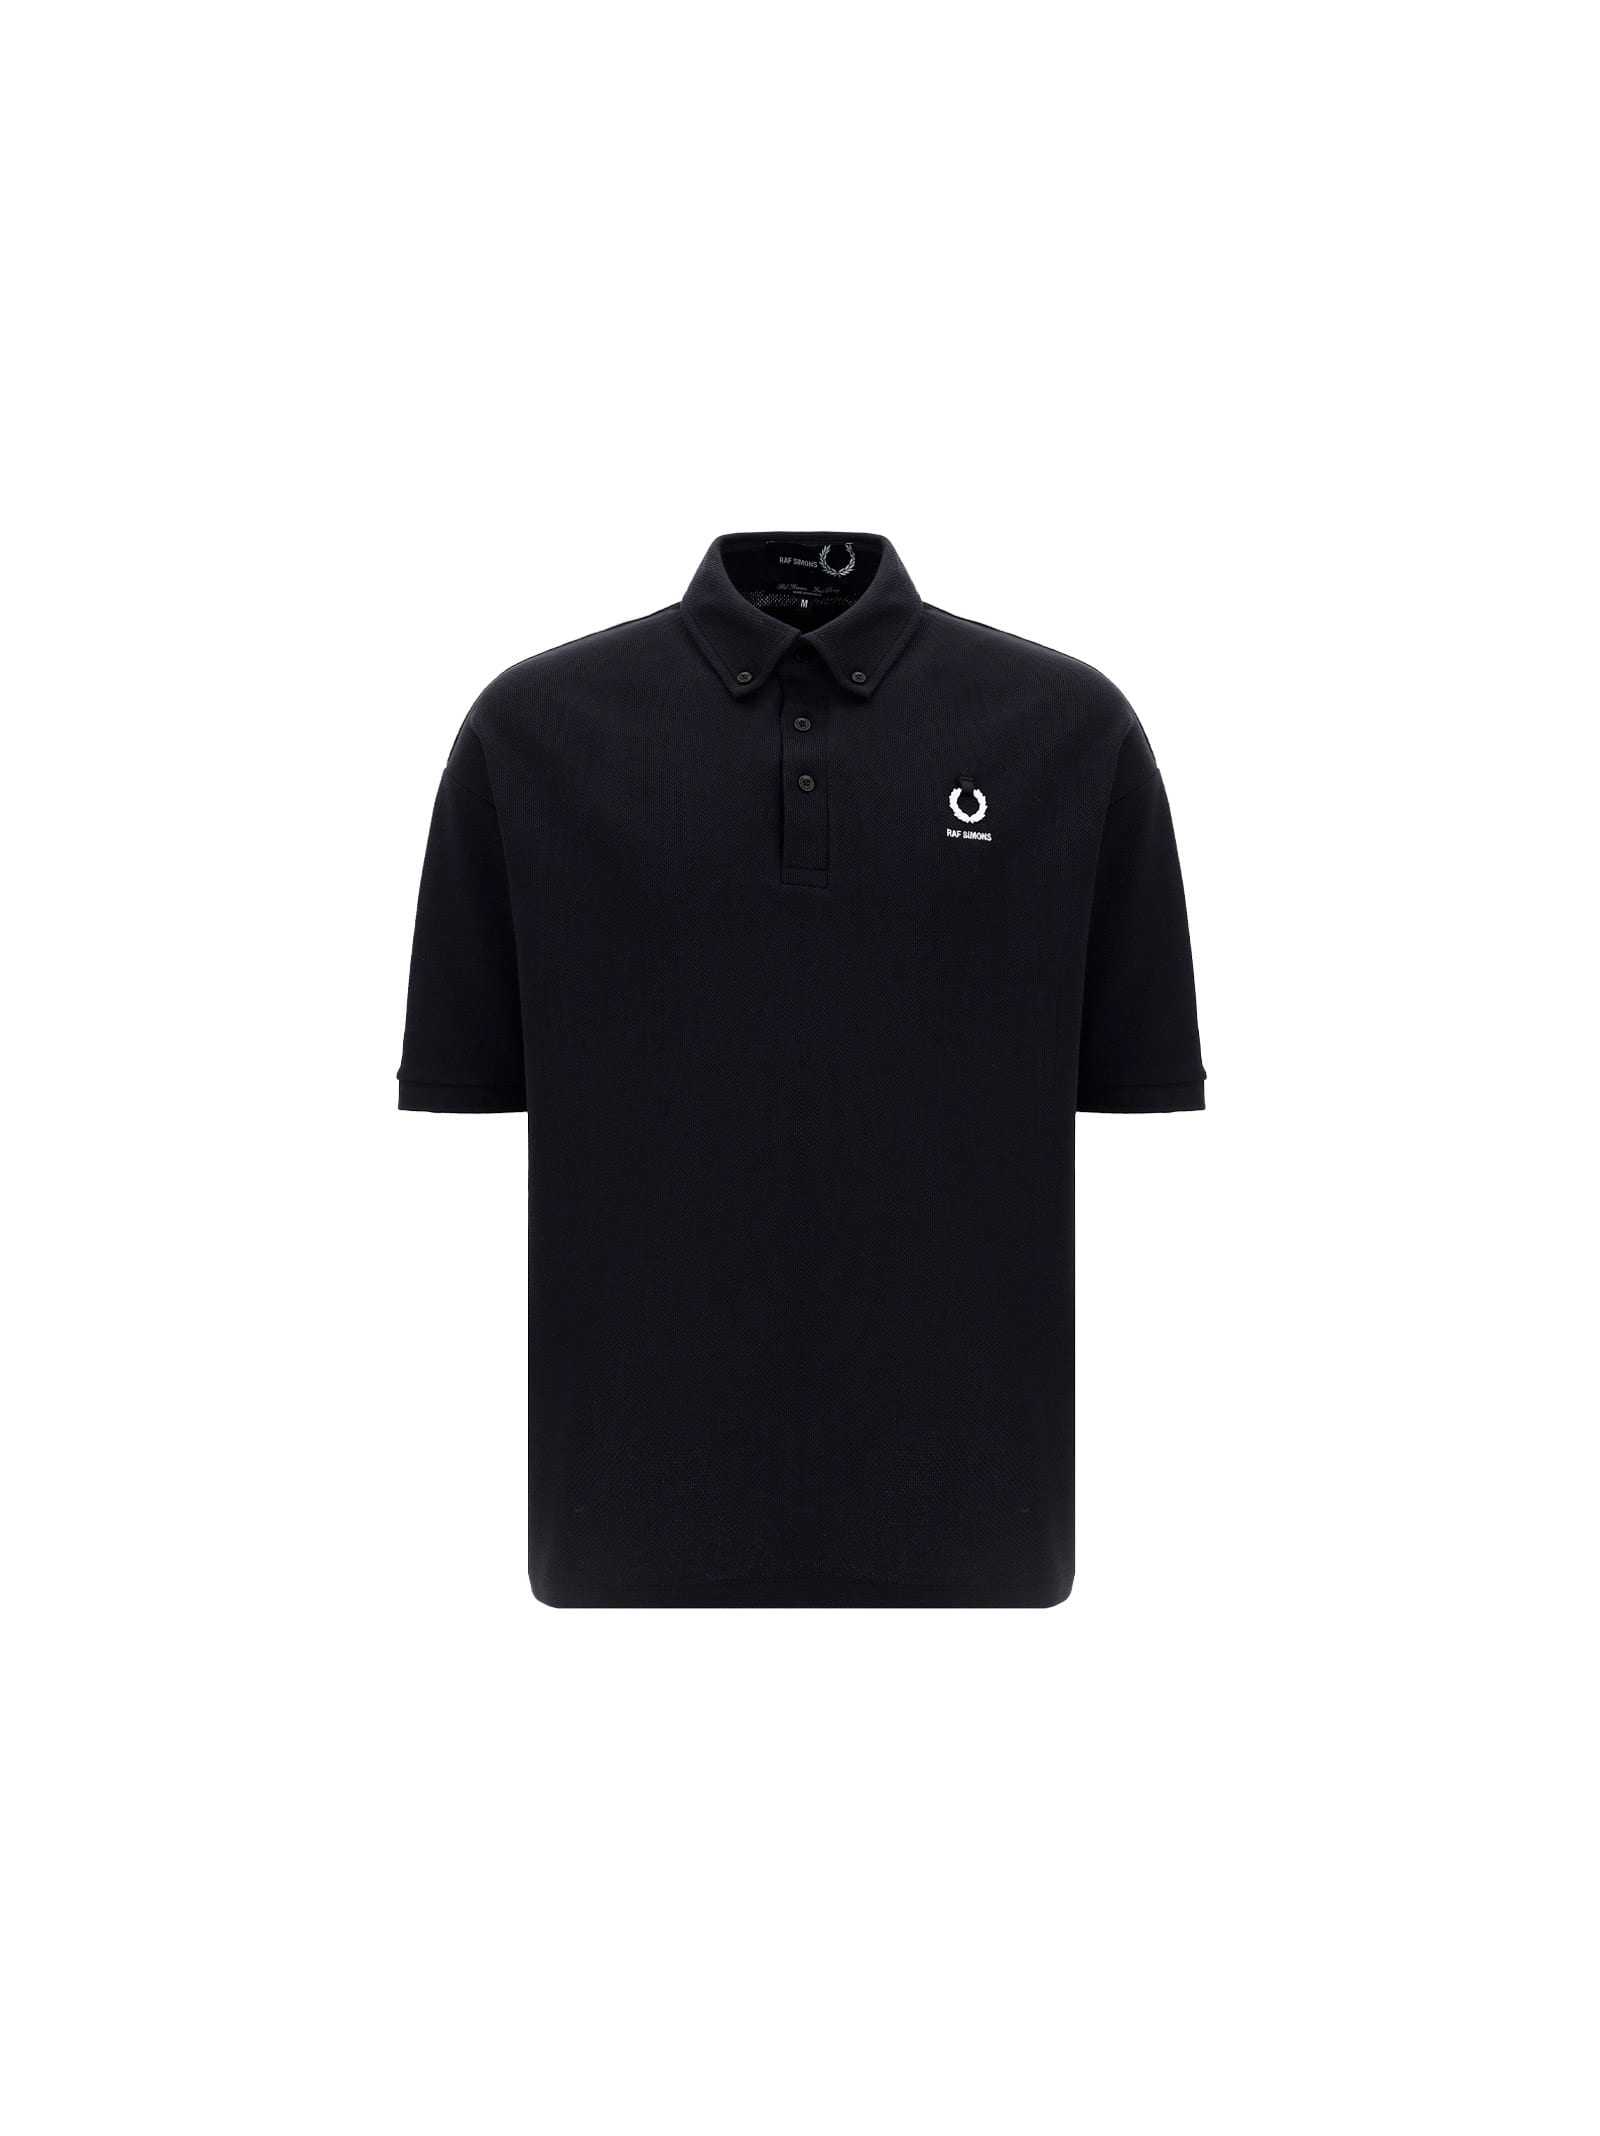 FRED PERRY FRED PERRY X RAF SIMONS POLO SHIRT,FPSM185438 102